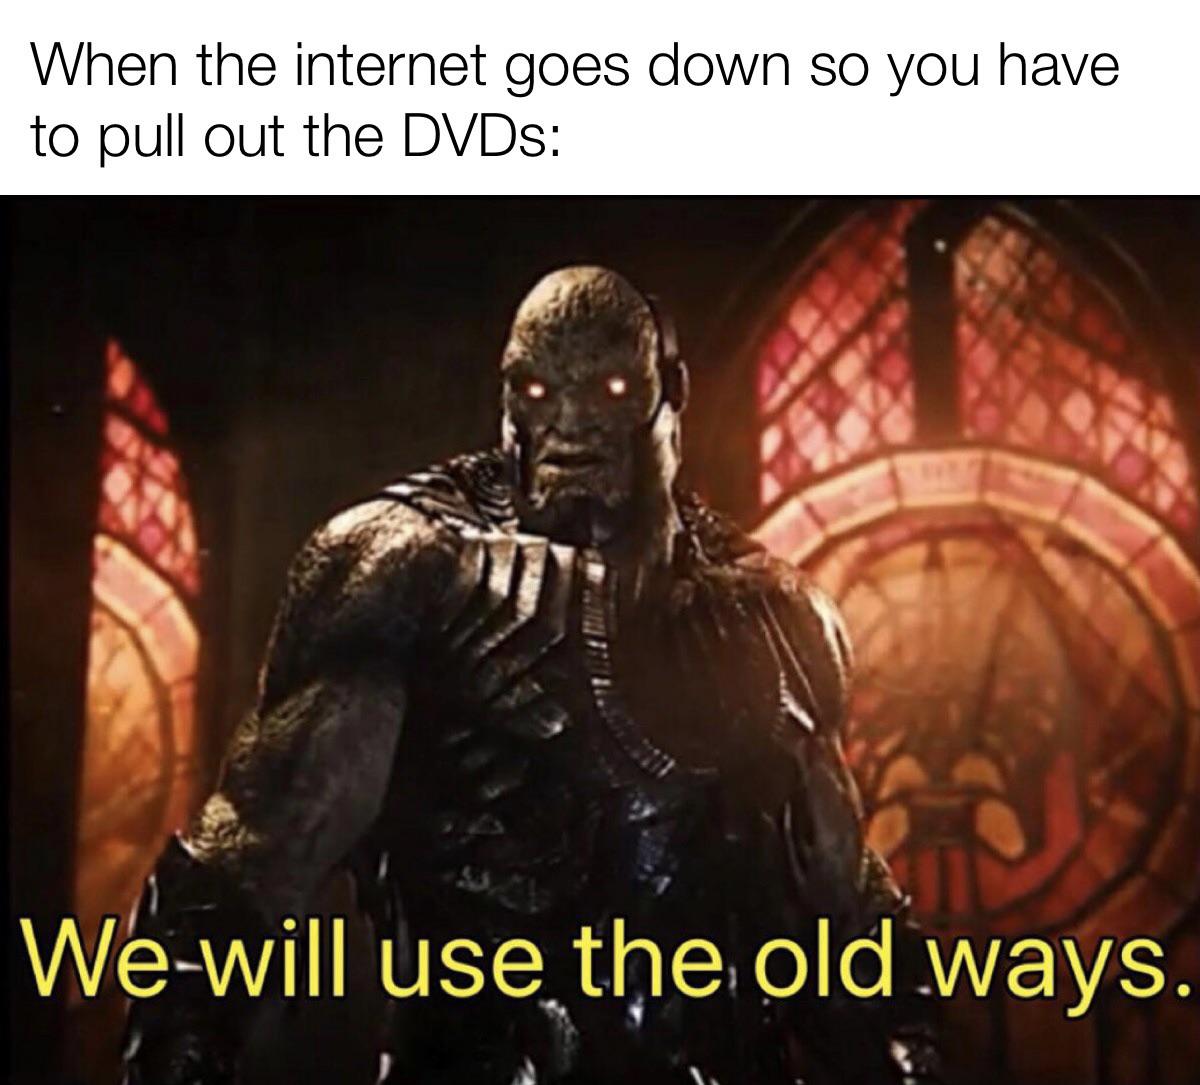 we will use the old ways darkseid - When the internet goes down so you have to pull out the DVDs We will use the old ways.